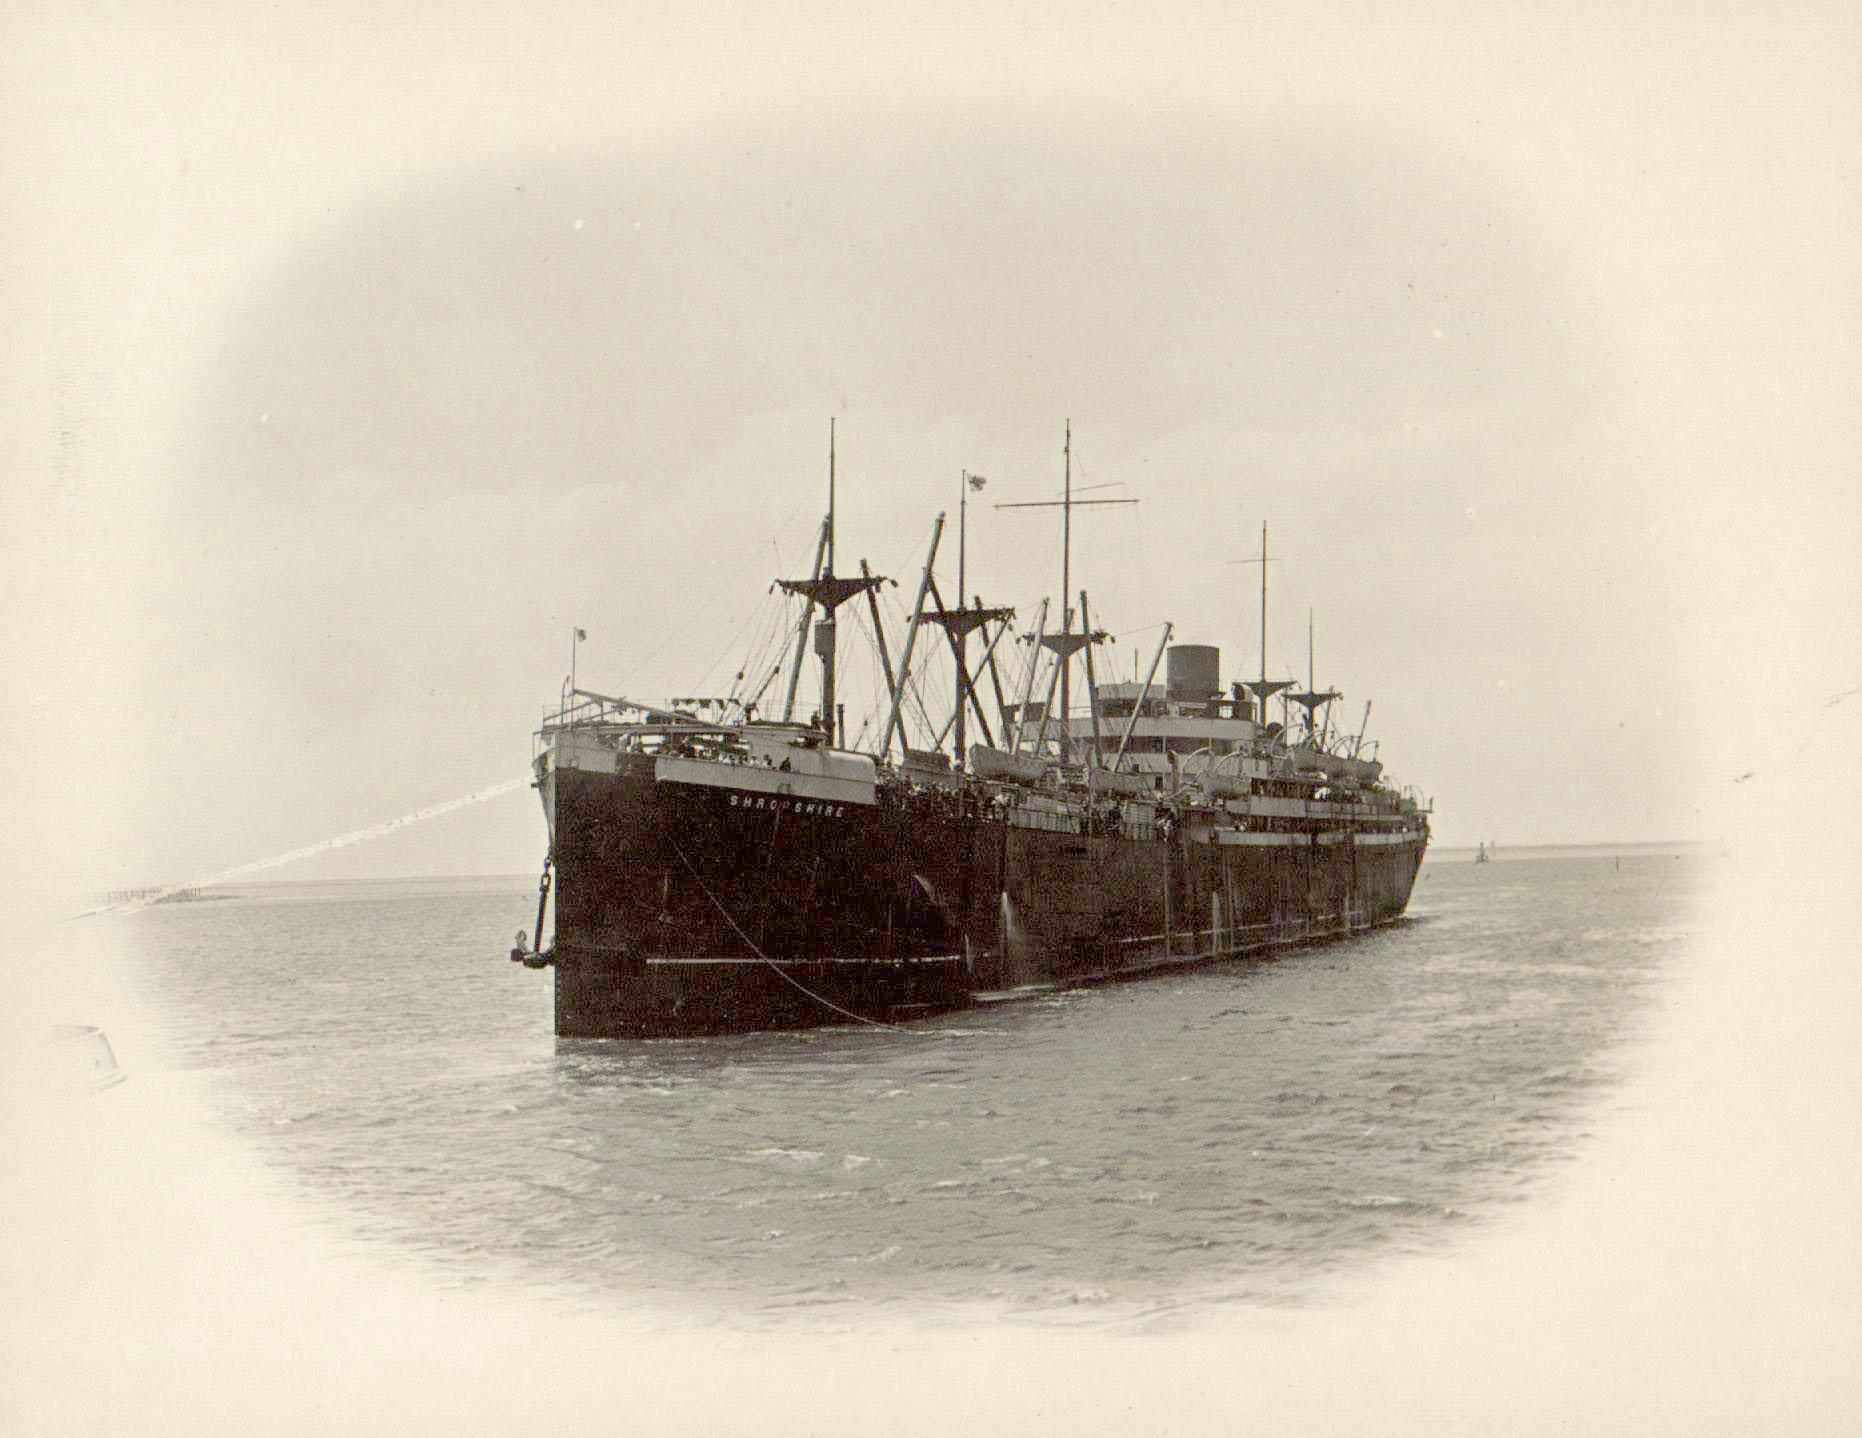 Passenger Cargo vessel "S.S. Shropshire", built in 1911 at Glasgow by John Brown for Federal Steam Navigation Co.  A Steel twin screw, 5 masted Steamship.

Tonnage:  12,184 gross
Official Number:  132607
Port Of Registry:  London
Dimensions:  length 